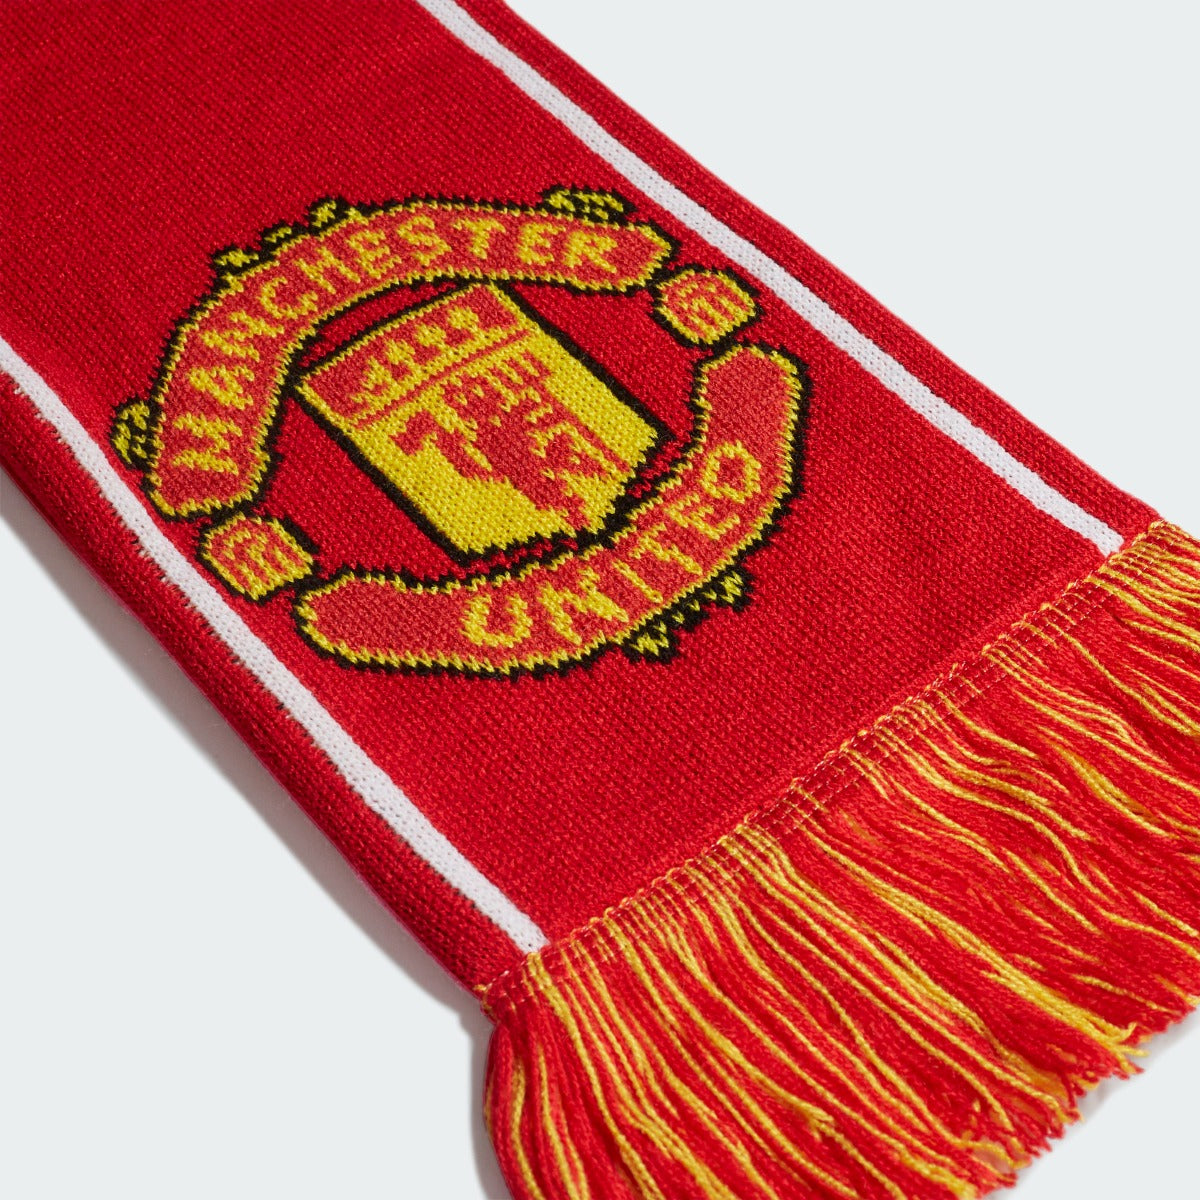 Adidas 2021-22 Manchester United Scarf - Red-White (Detail 2)